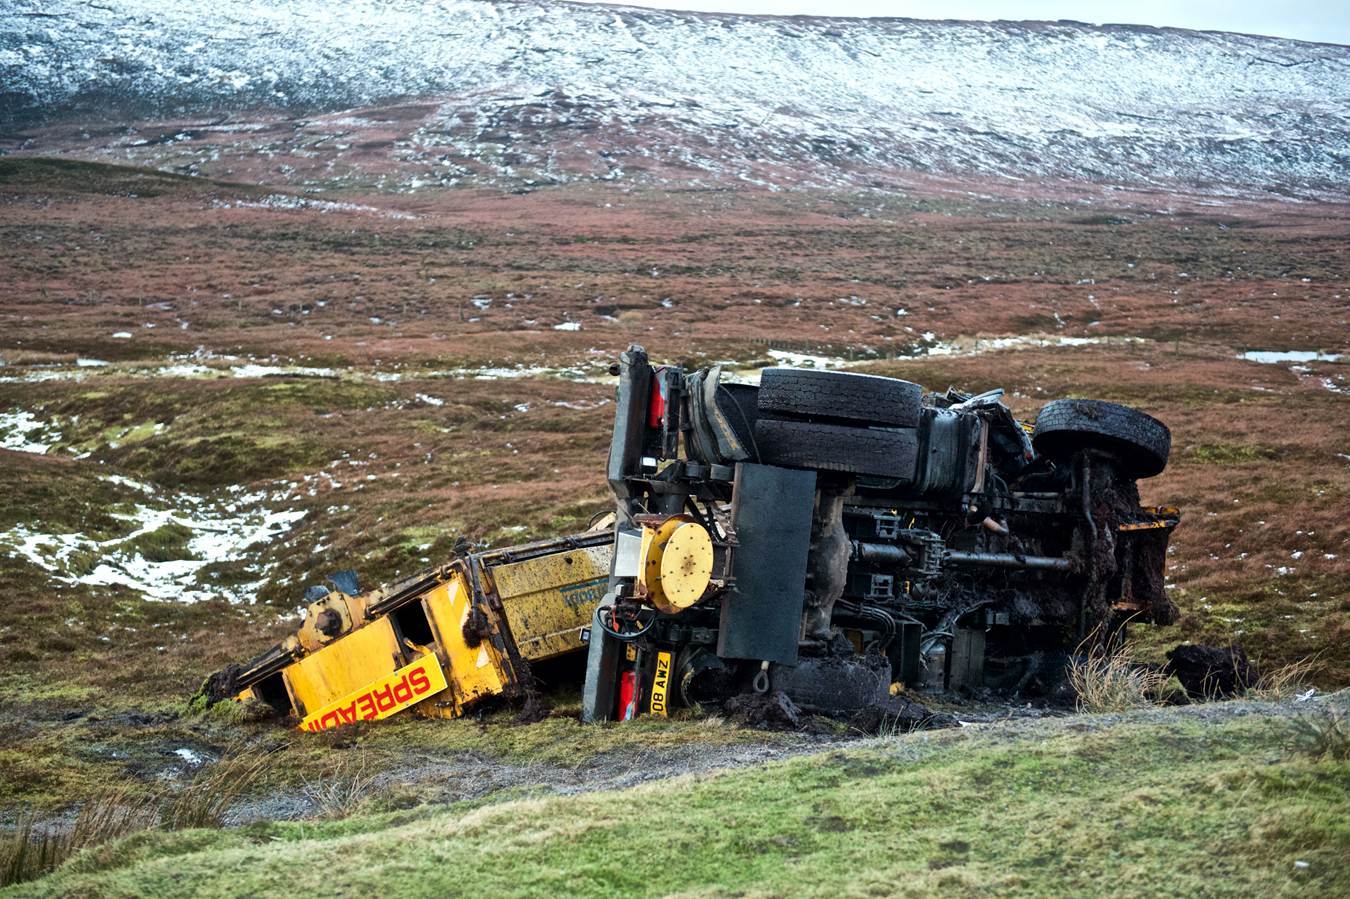 The overturned gritter lying beside the road